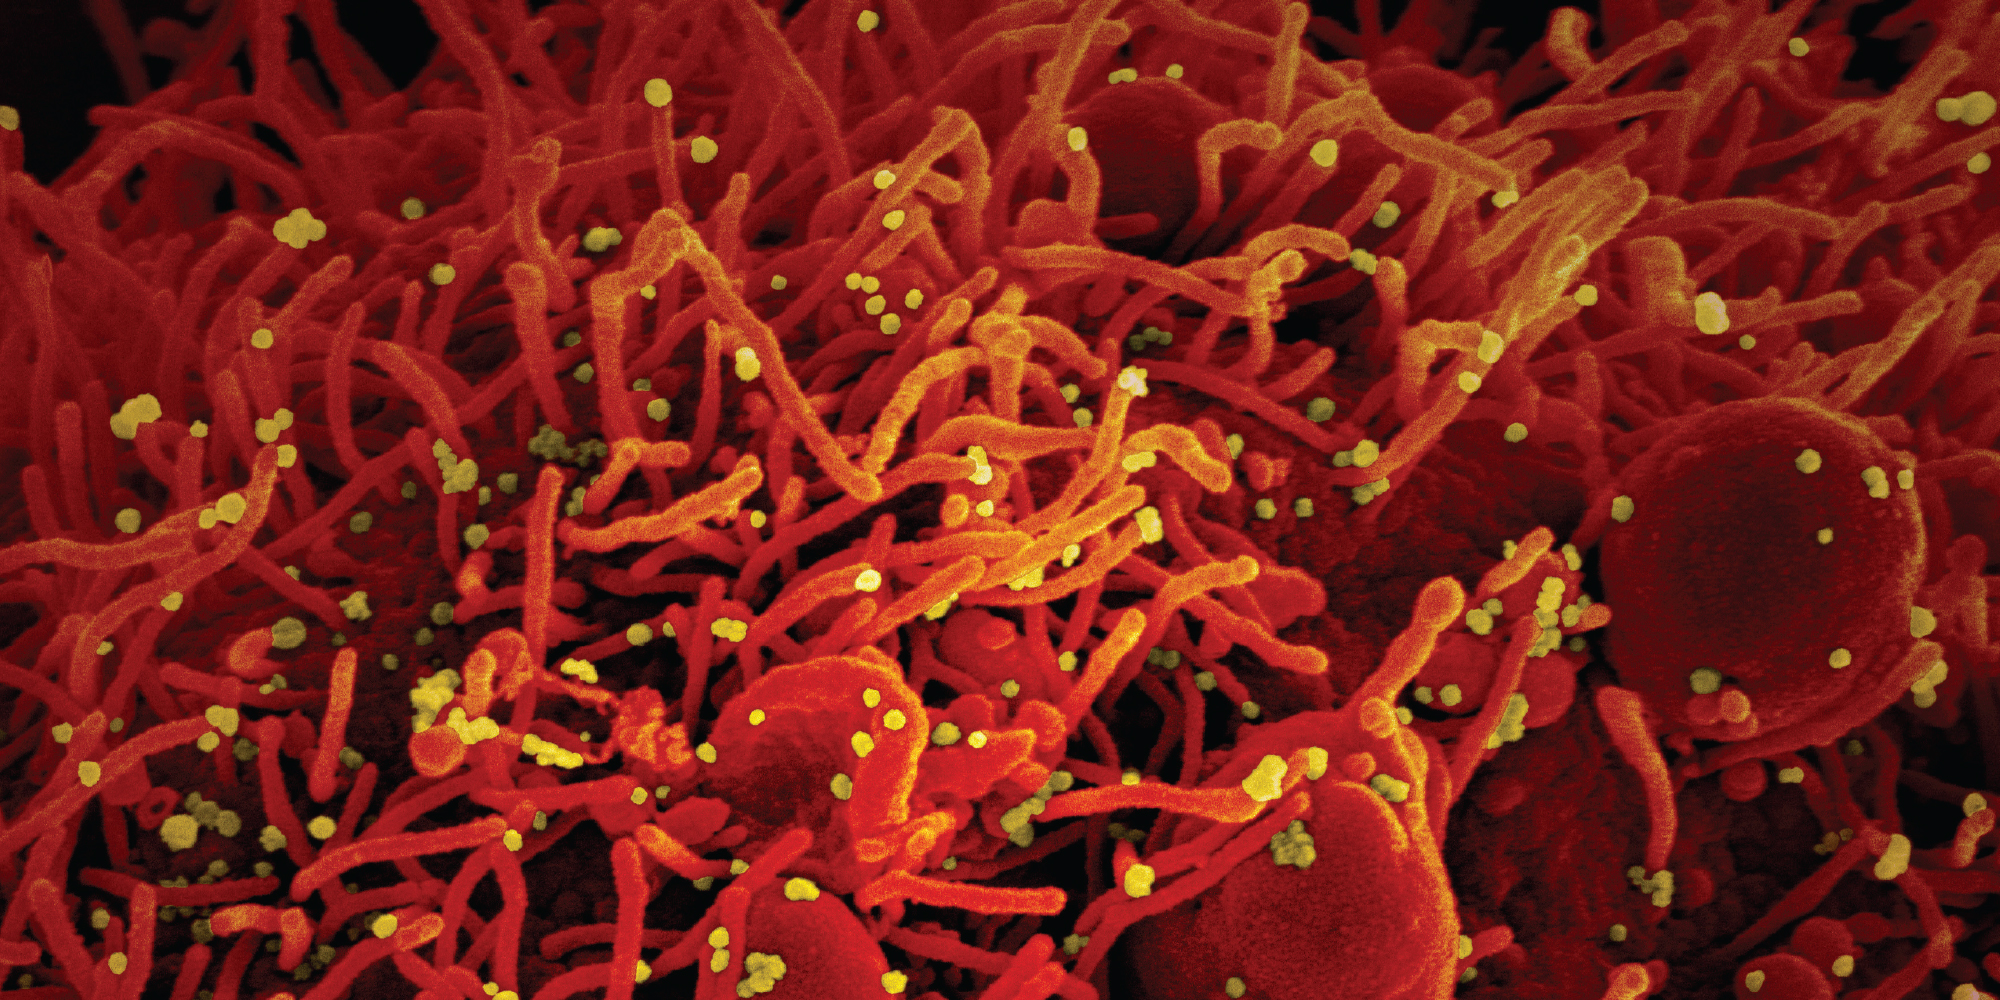 Colorized scanning electron microscope image of a cell infected with SARS-CoV-2